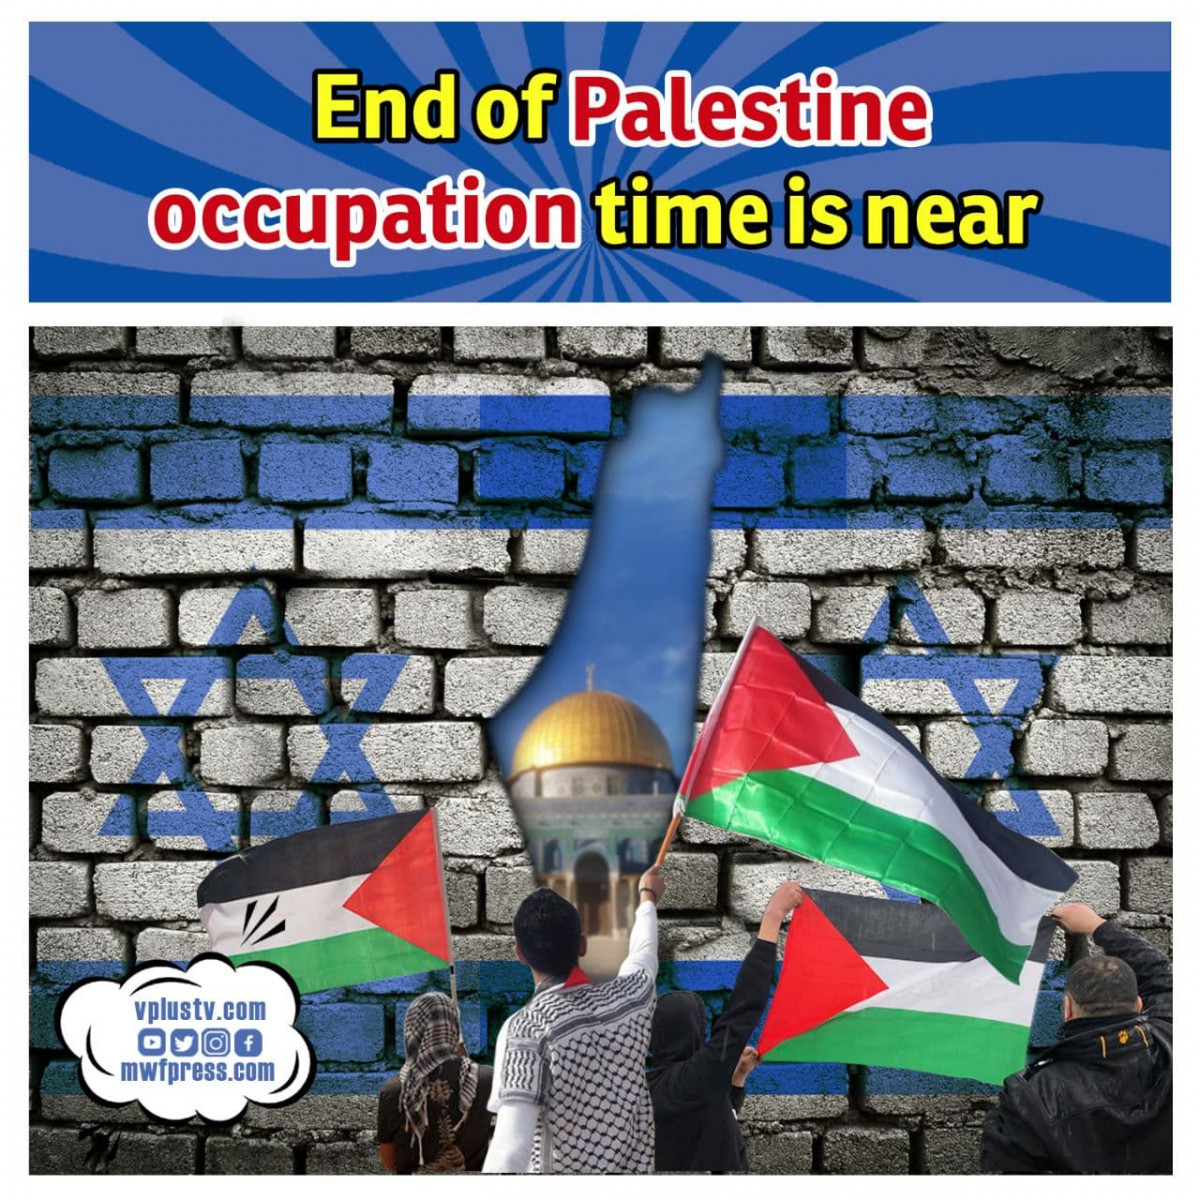 End of Palestine occupation time is near